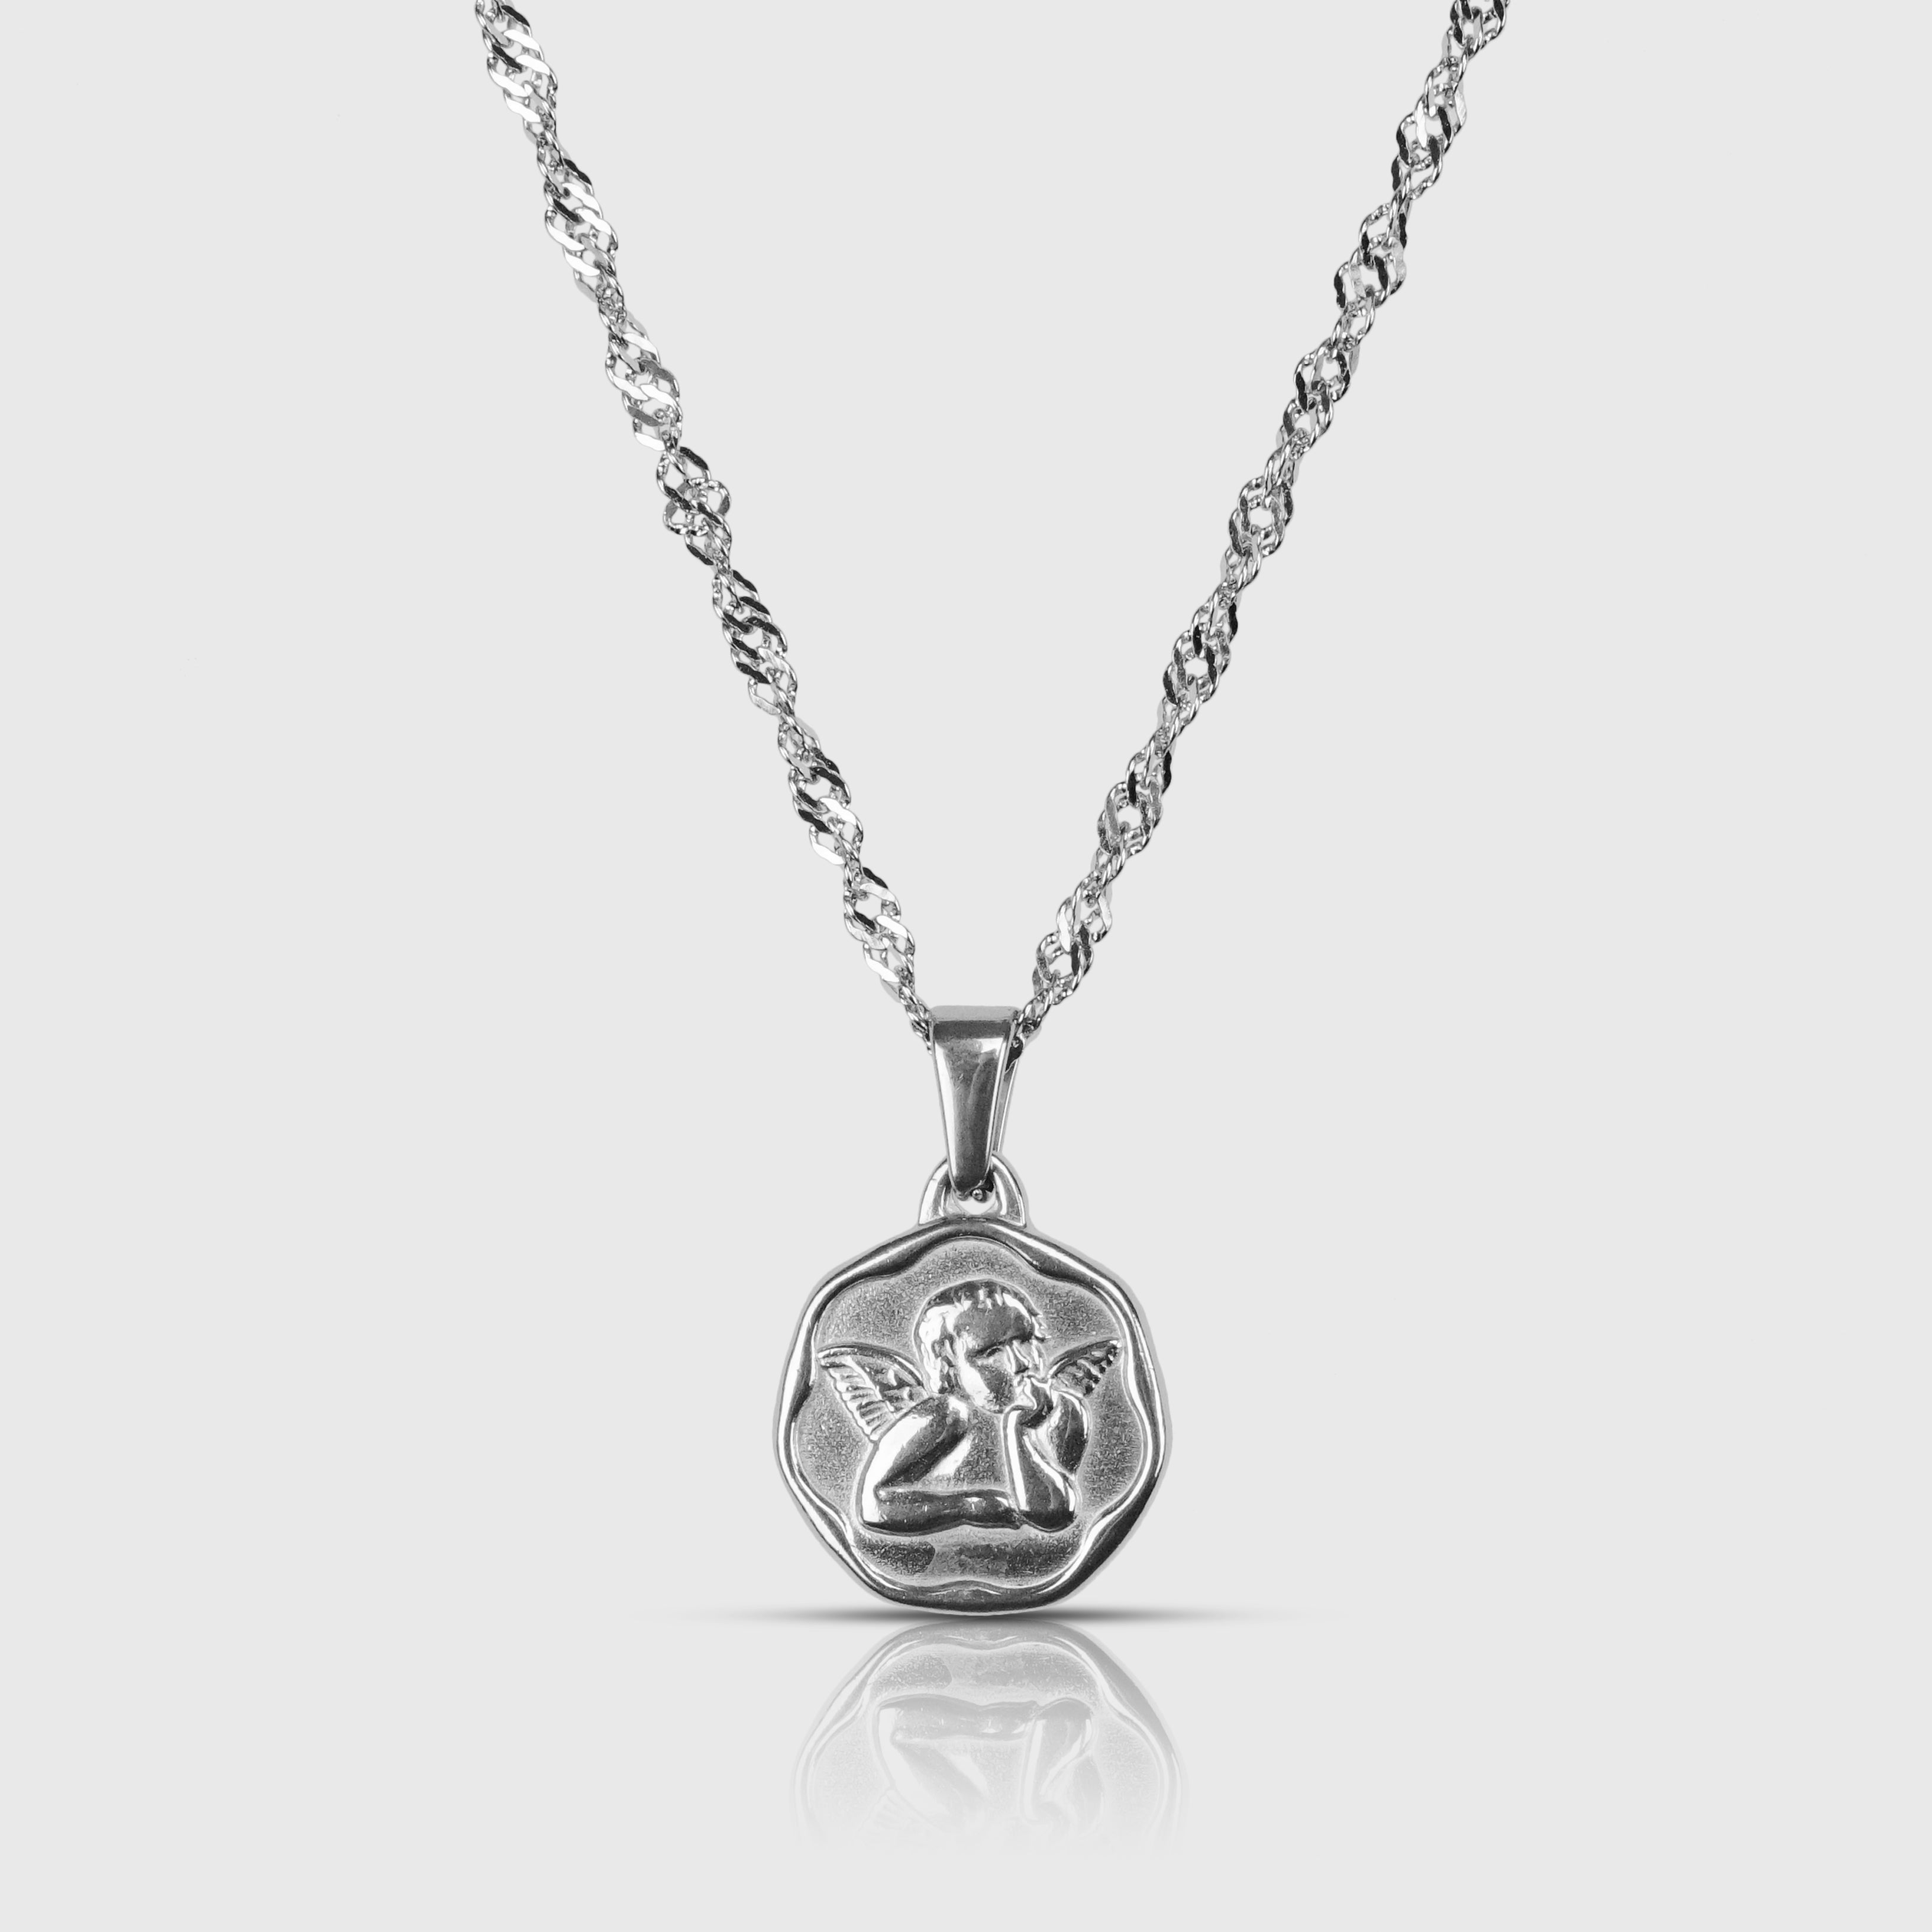 AMOR NECKLACE - SILVER TONE